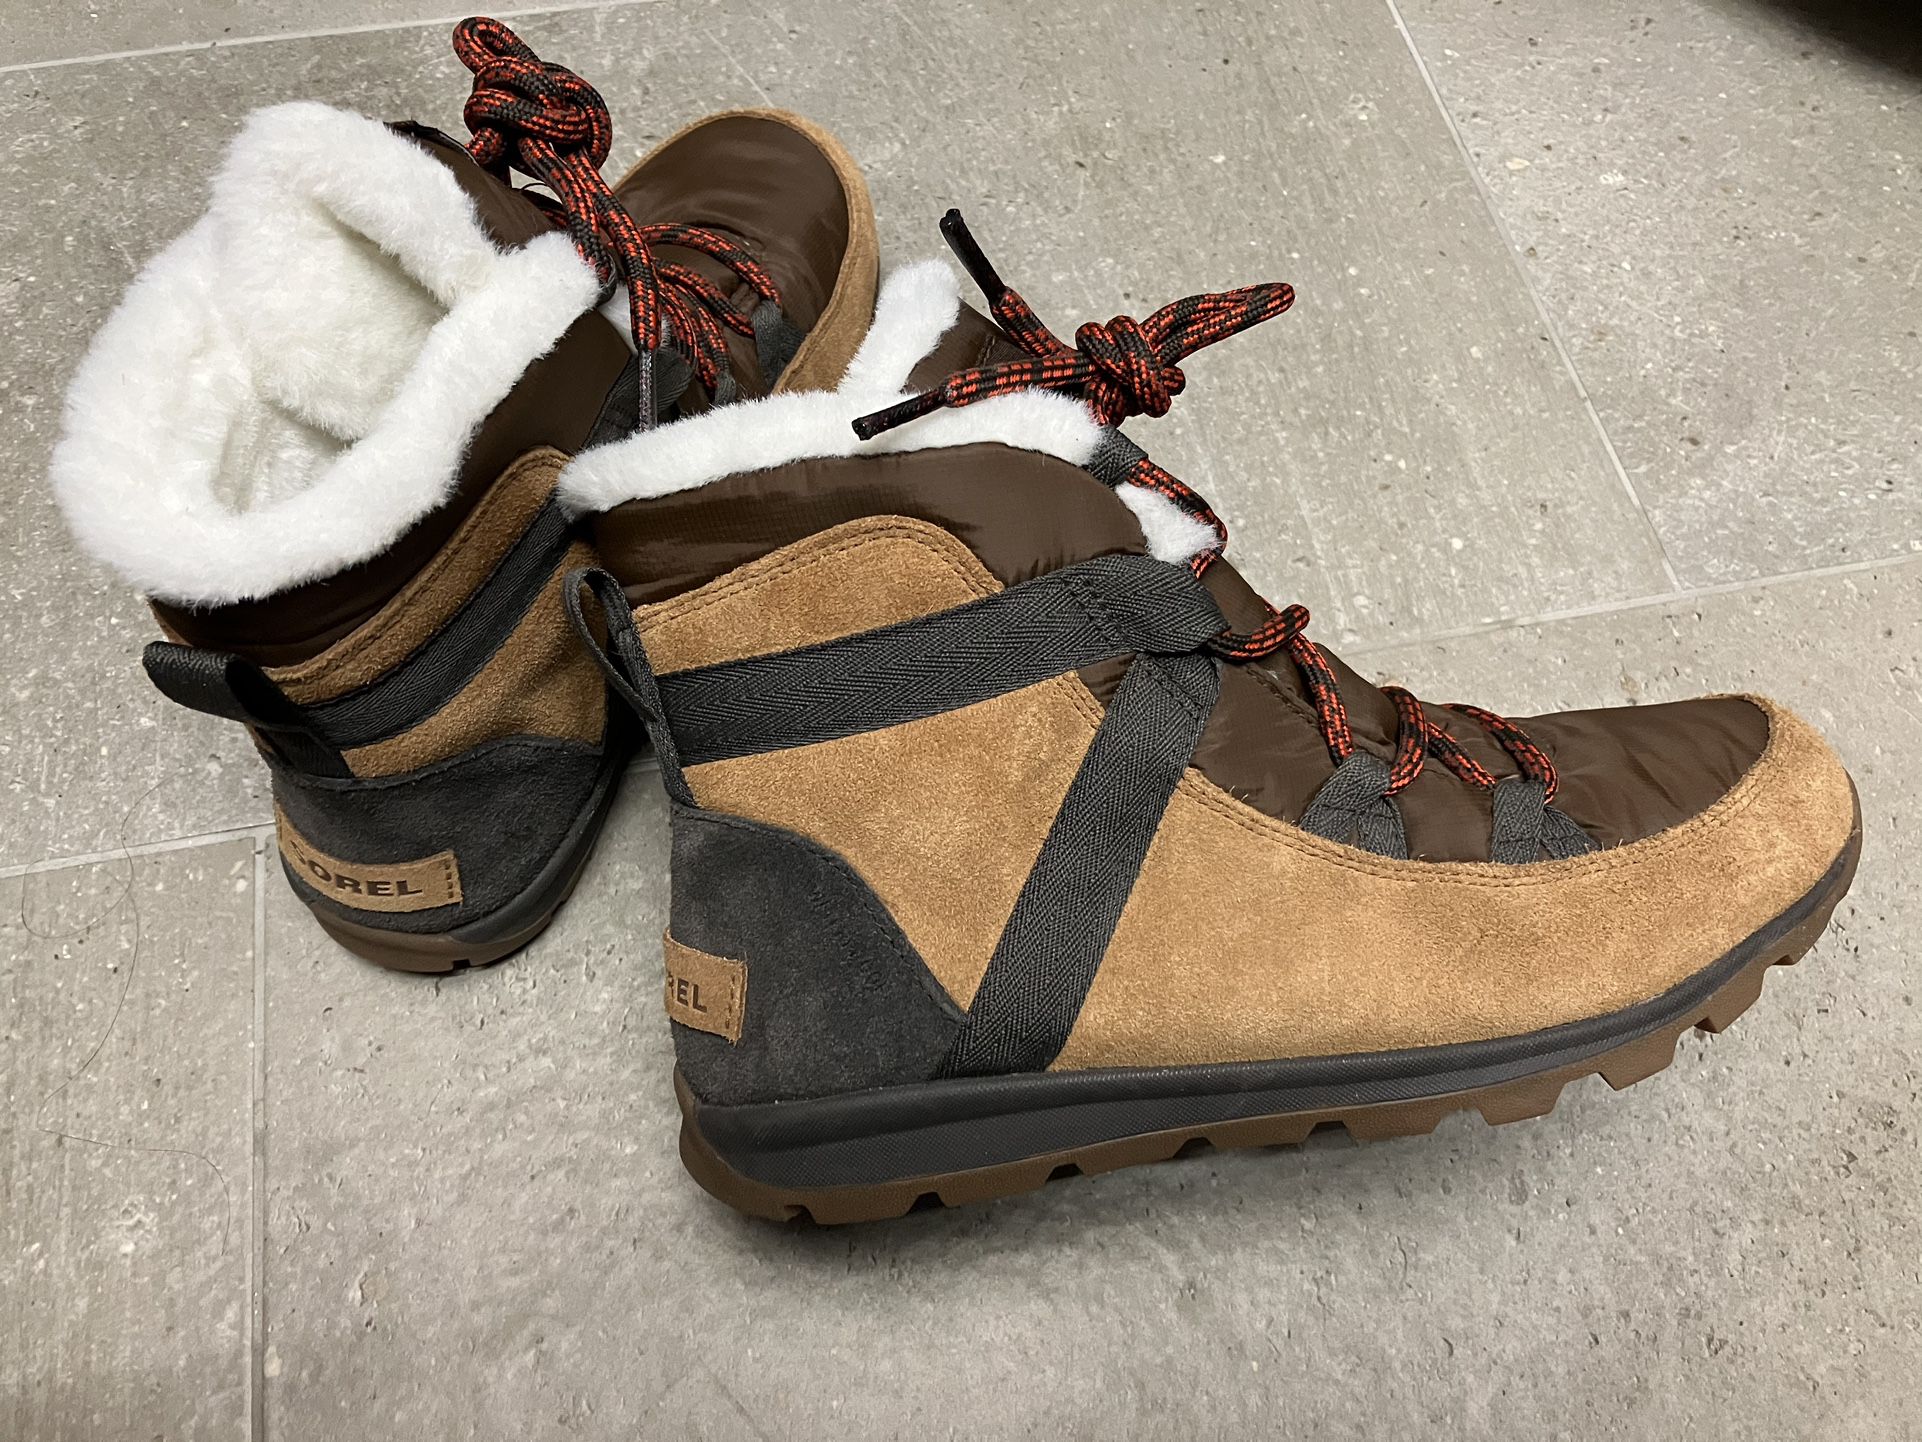 SOREL Boots Whitney Flurry Winter Waterproof Fur Lined Snow Shoes Womens Size 7.5 Run 1/2 Size Down Excellent Condition Unused 